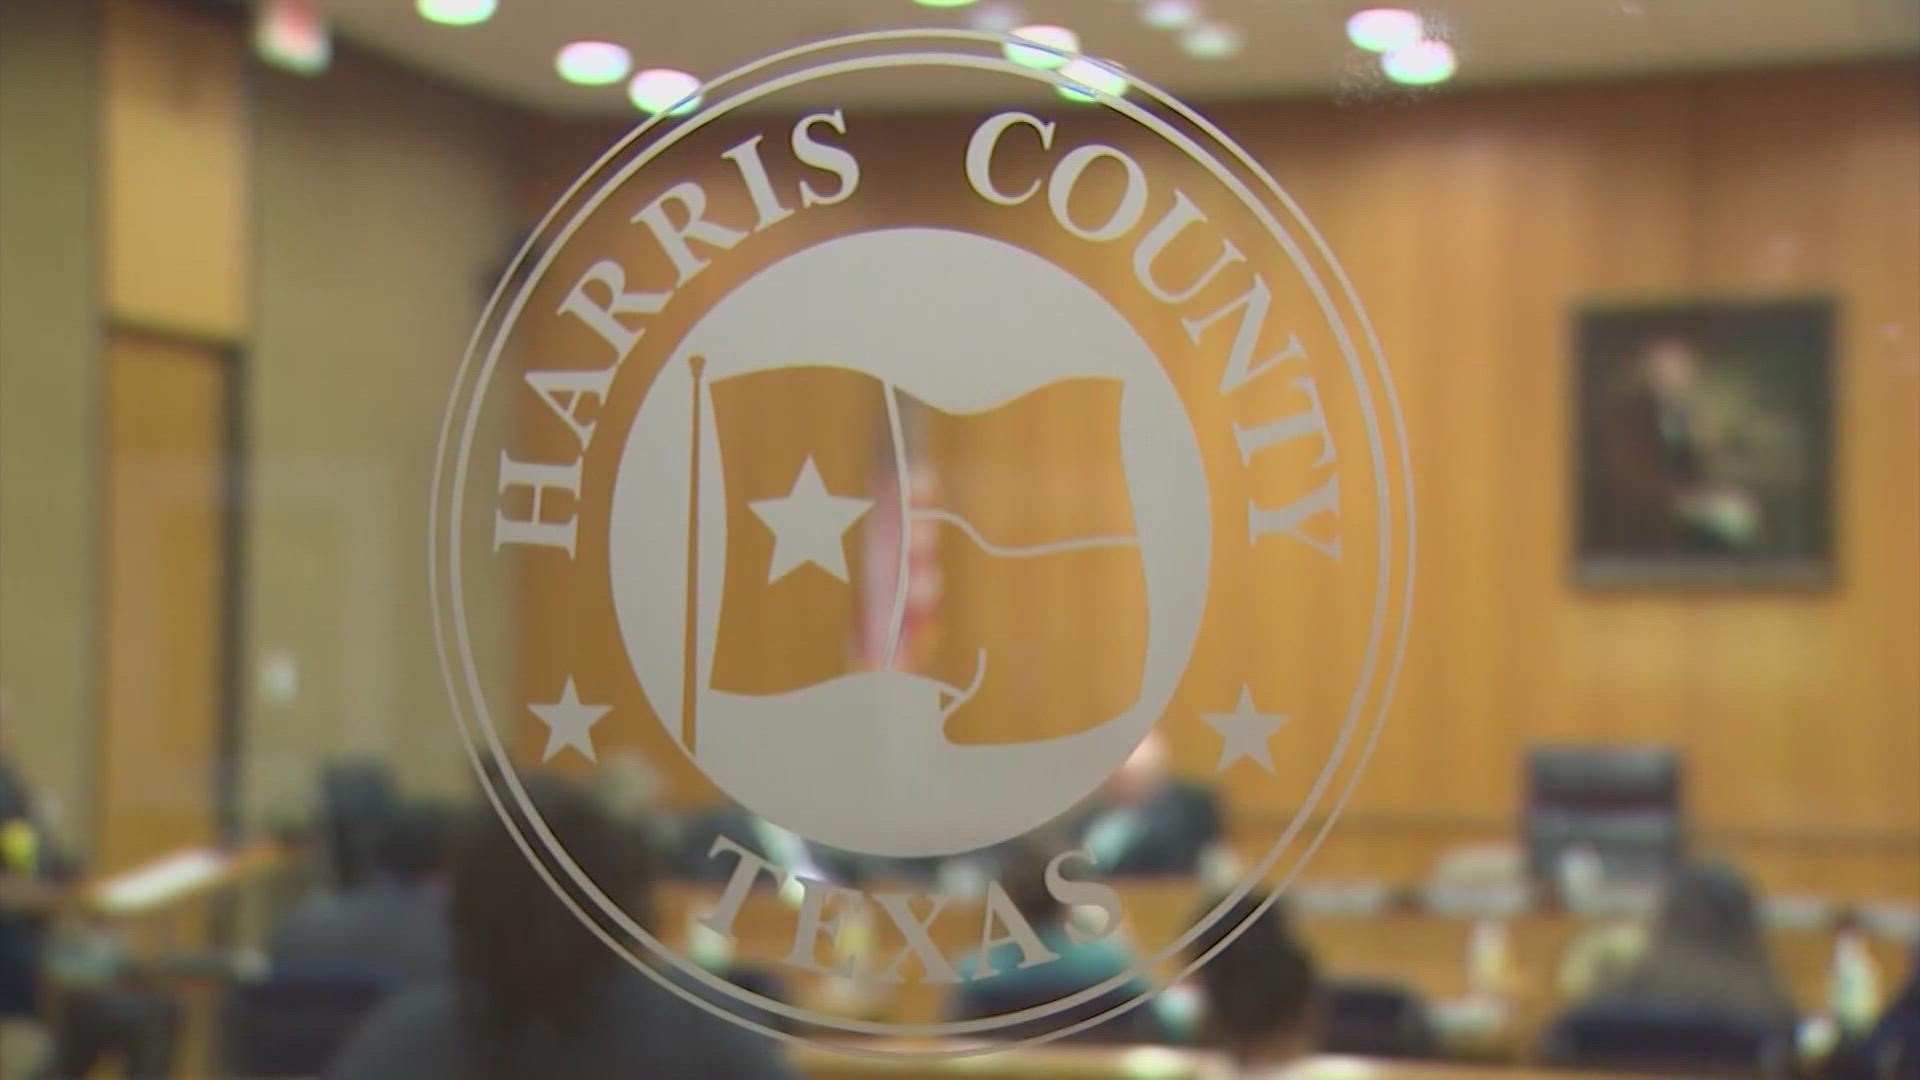 With Harris County unable to set a new budget and tax rate, county departments could see major impacts.